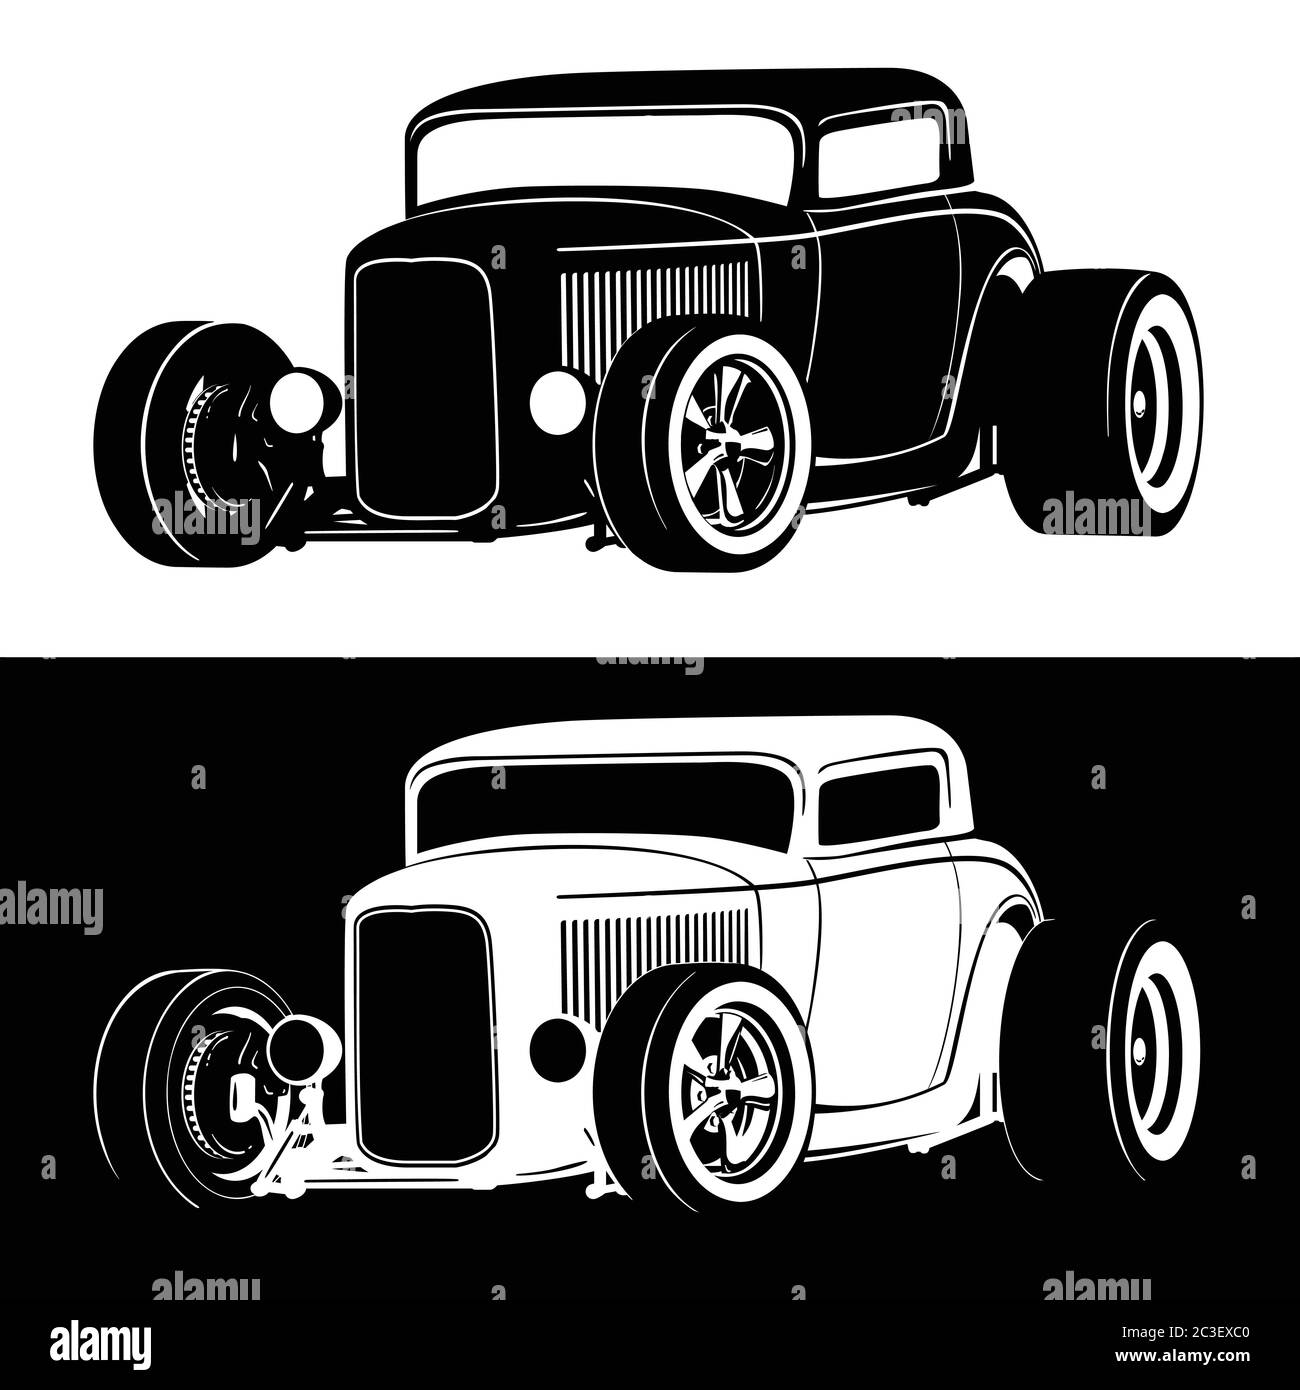 Classic American Hot Rod car isolated vector illustration in both black on white and white on black versions Stock Vector